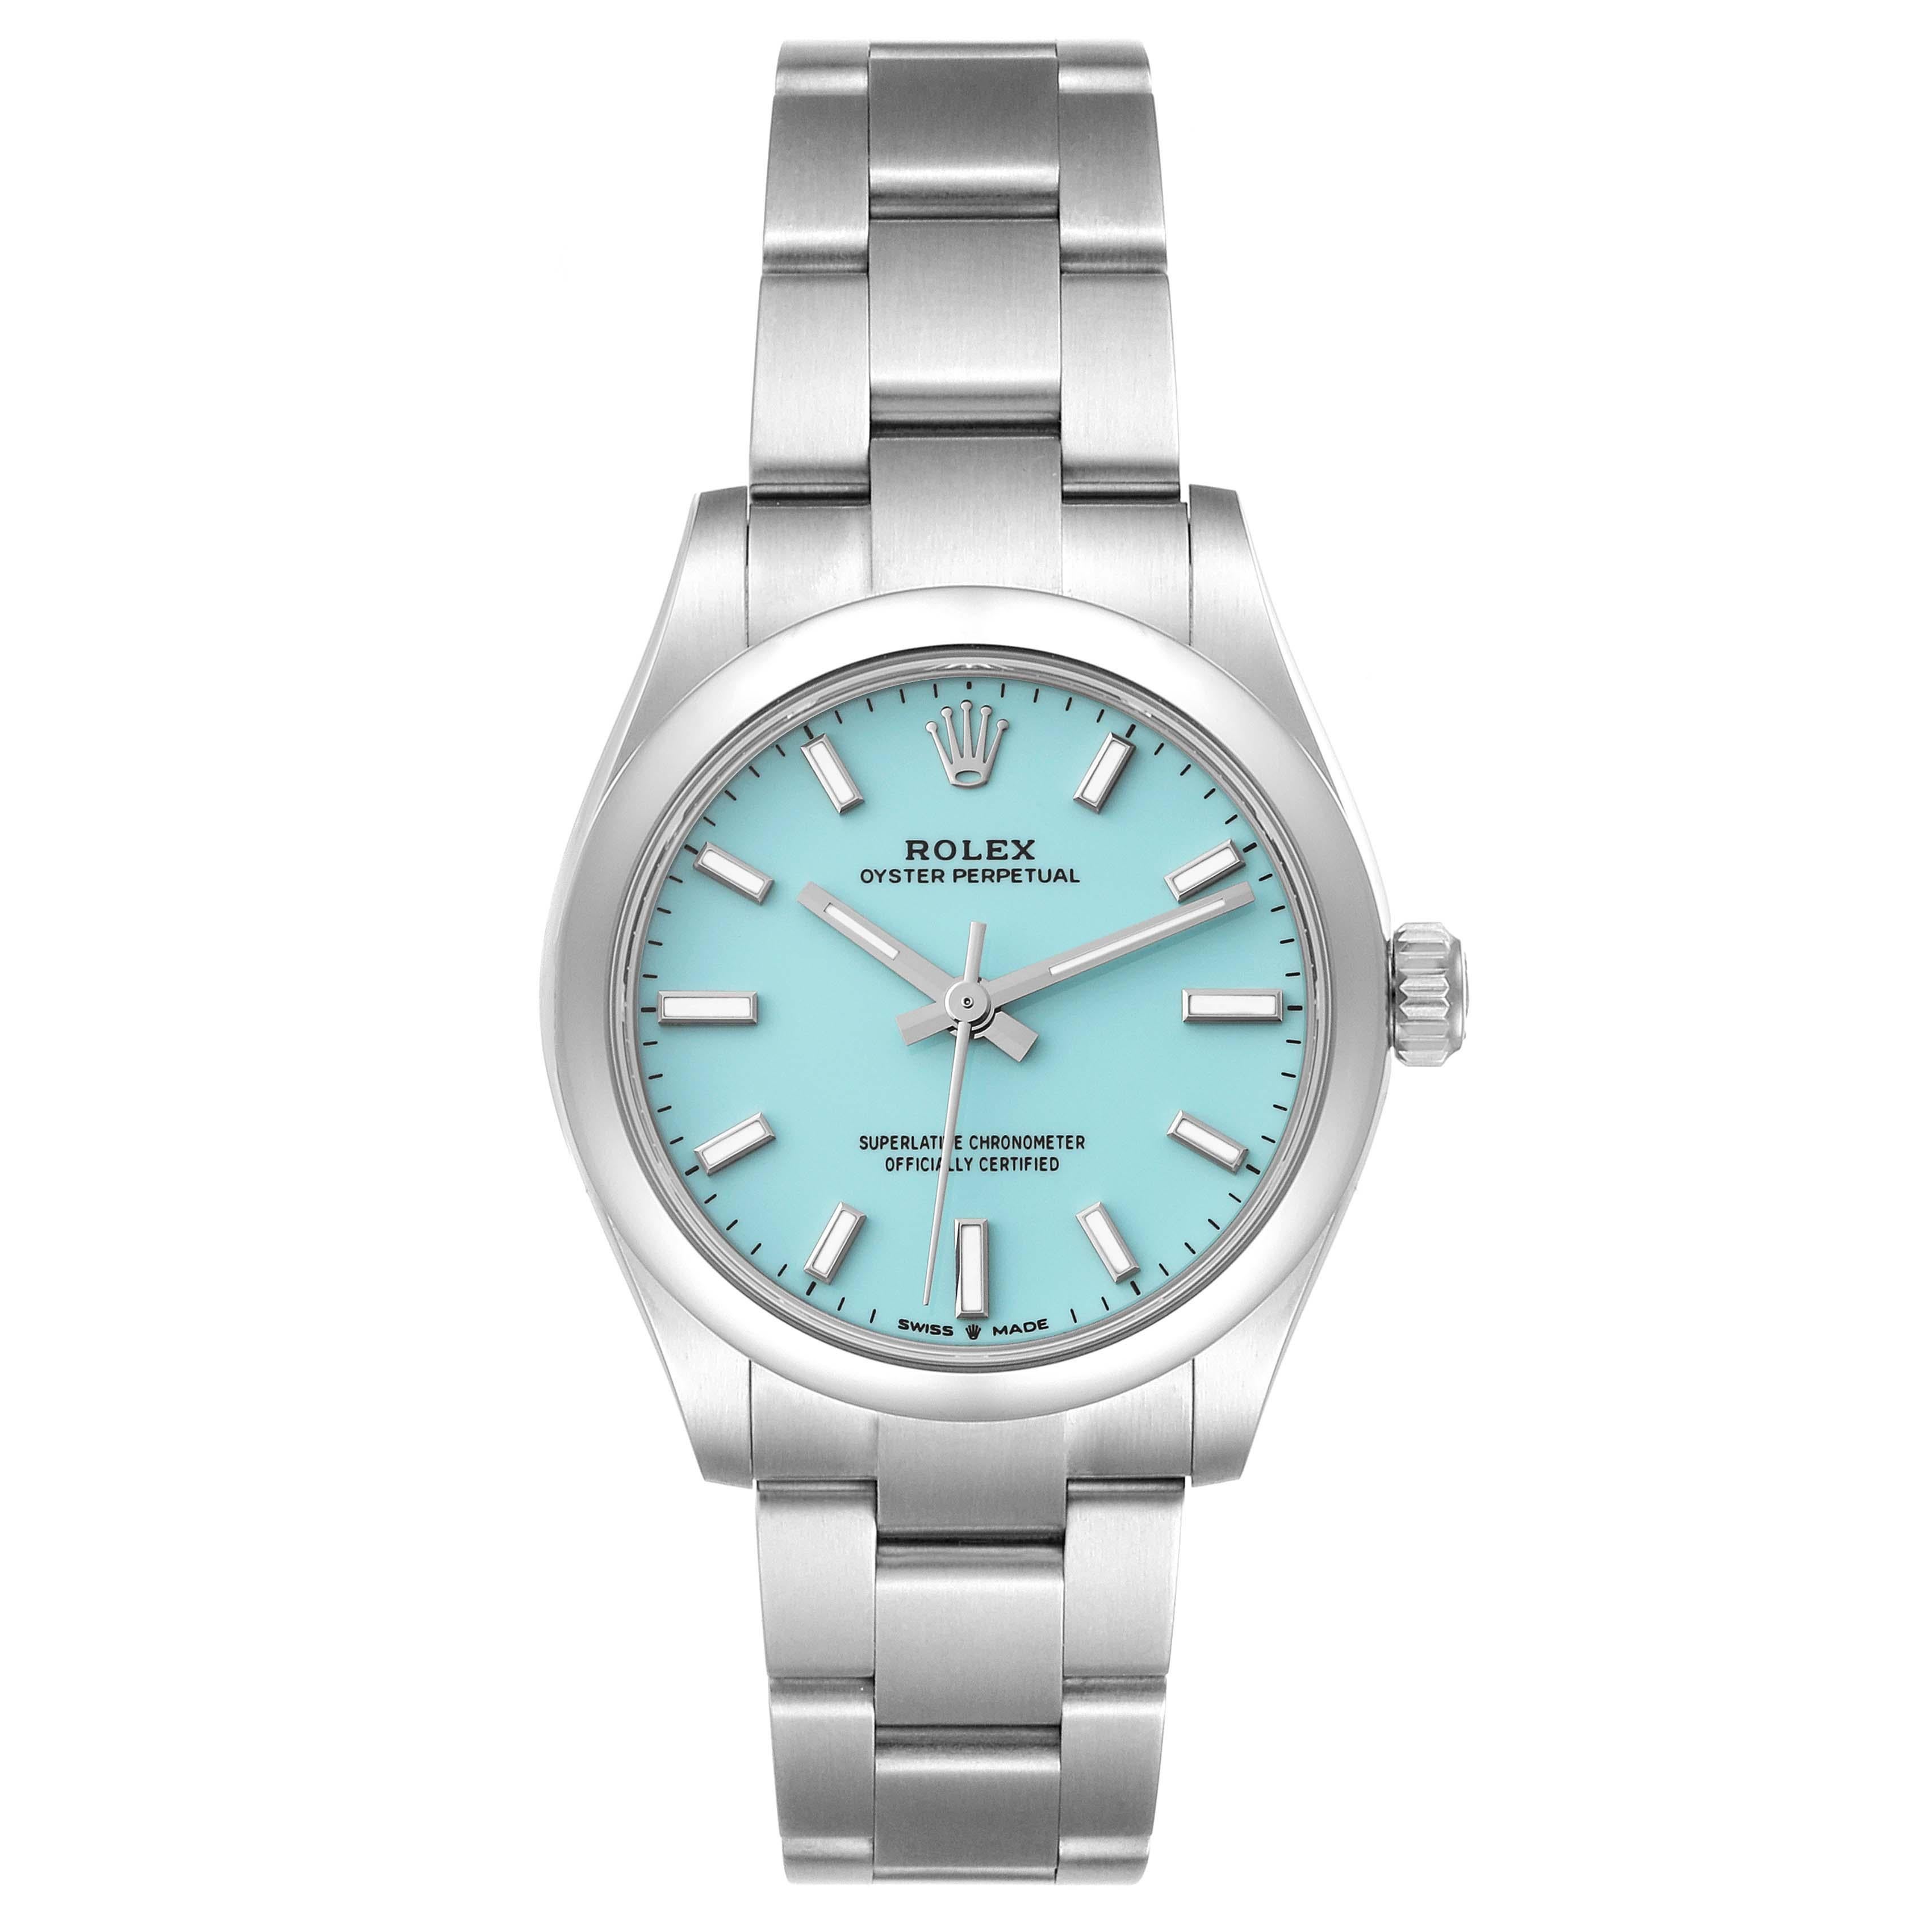 Rolex Oyster Perpetual Midsize Turquoise Dial Steel Ladies Watch 277200 Box Card. Automatic self-winding movement. Stainless steel oyster case 31.0 mm in diameter. Rolex logo on a crown. Stainless steel smooth bezel. Scratch resistant sapphire